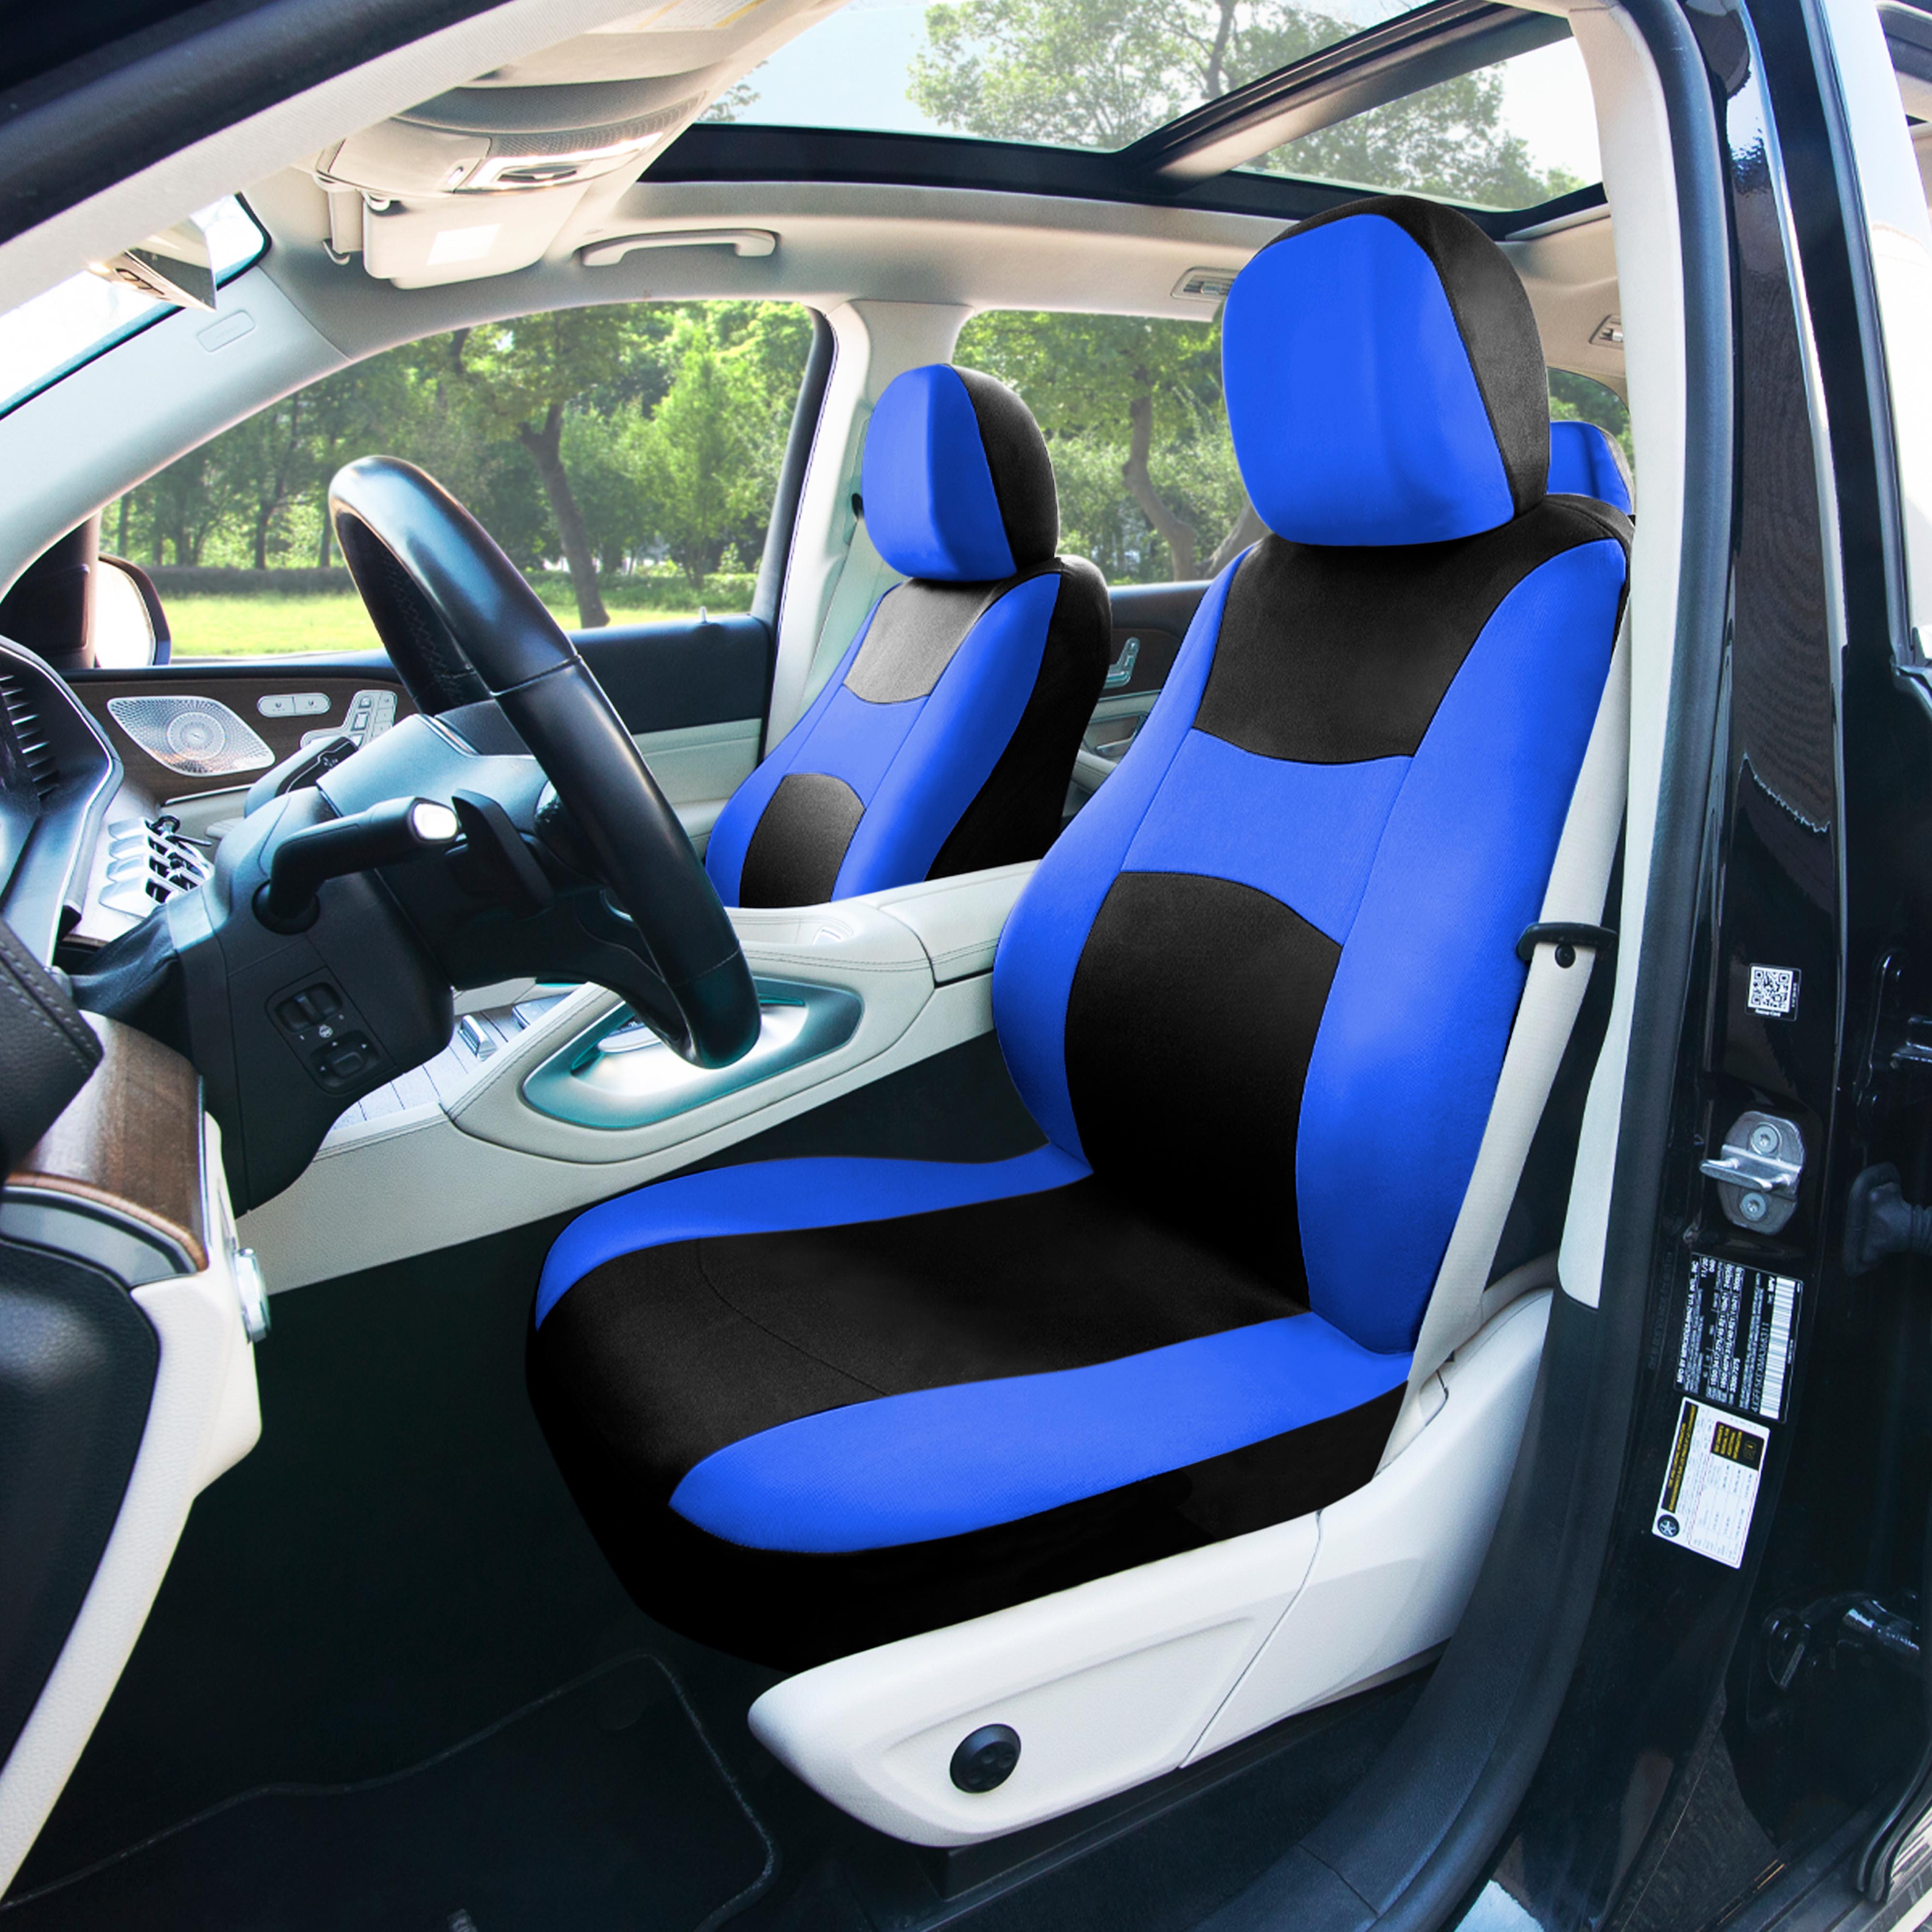 FH Group 3 rows Cloth Car Seat Covers for SUV, Sedan, Van Full Set - Universal Fit Automotive Seat Covers, Split Bench Rear Seat with Steering Wheel Cover, 4 Seatbelt Pads FB030217BLUEBLACK-COMBO - image 3 of 7